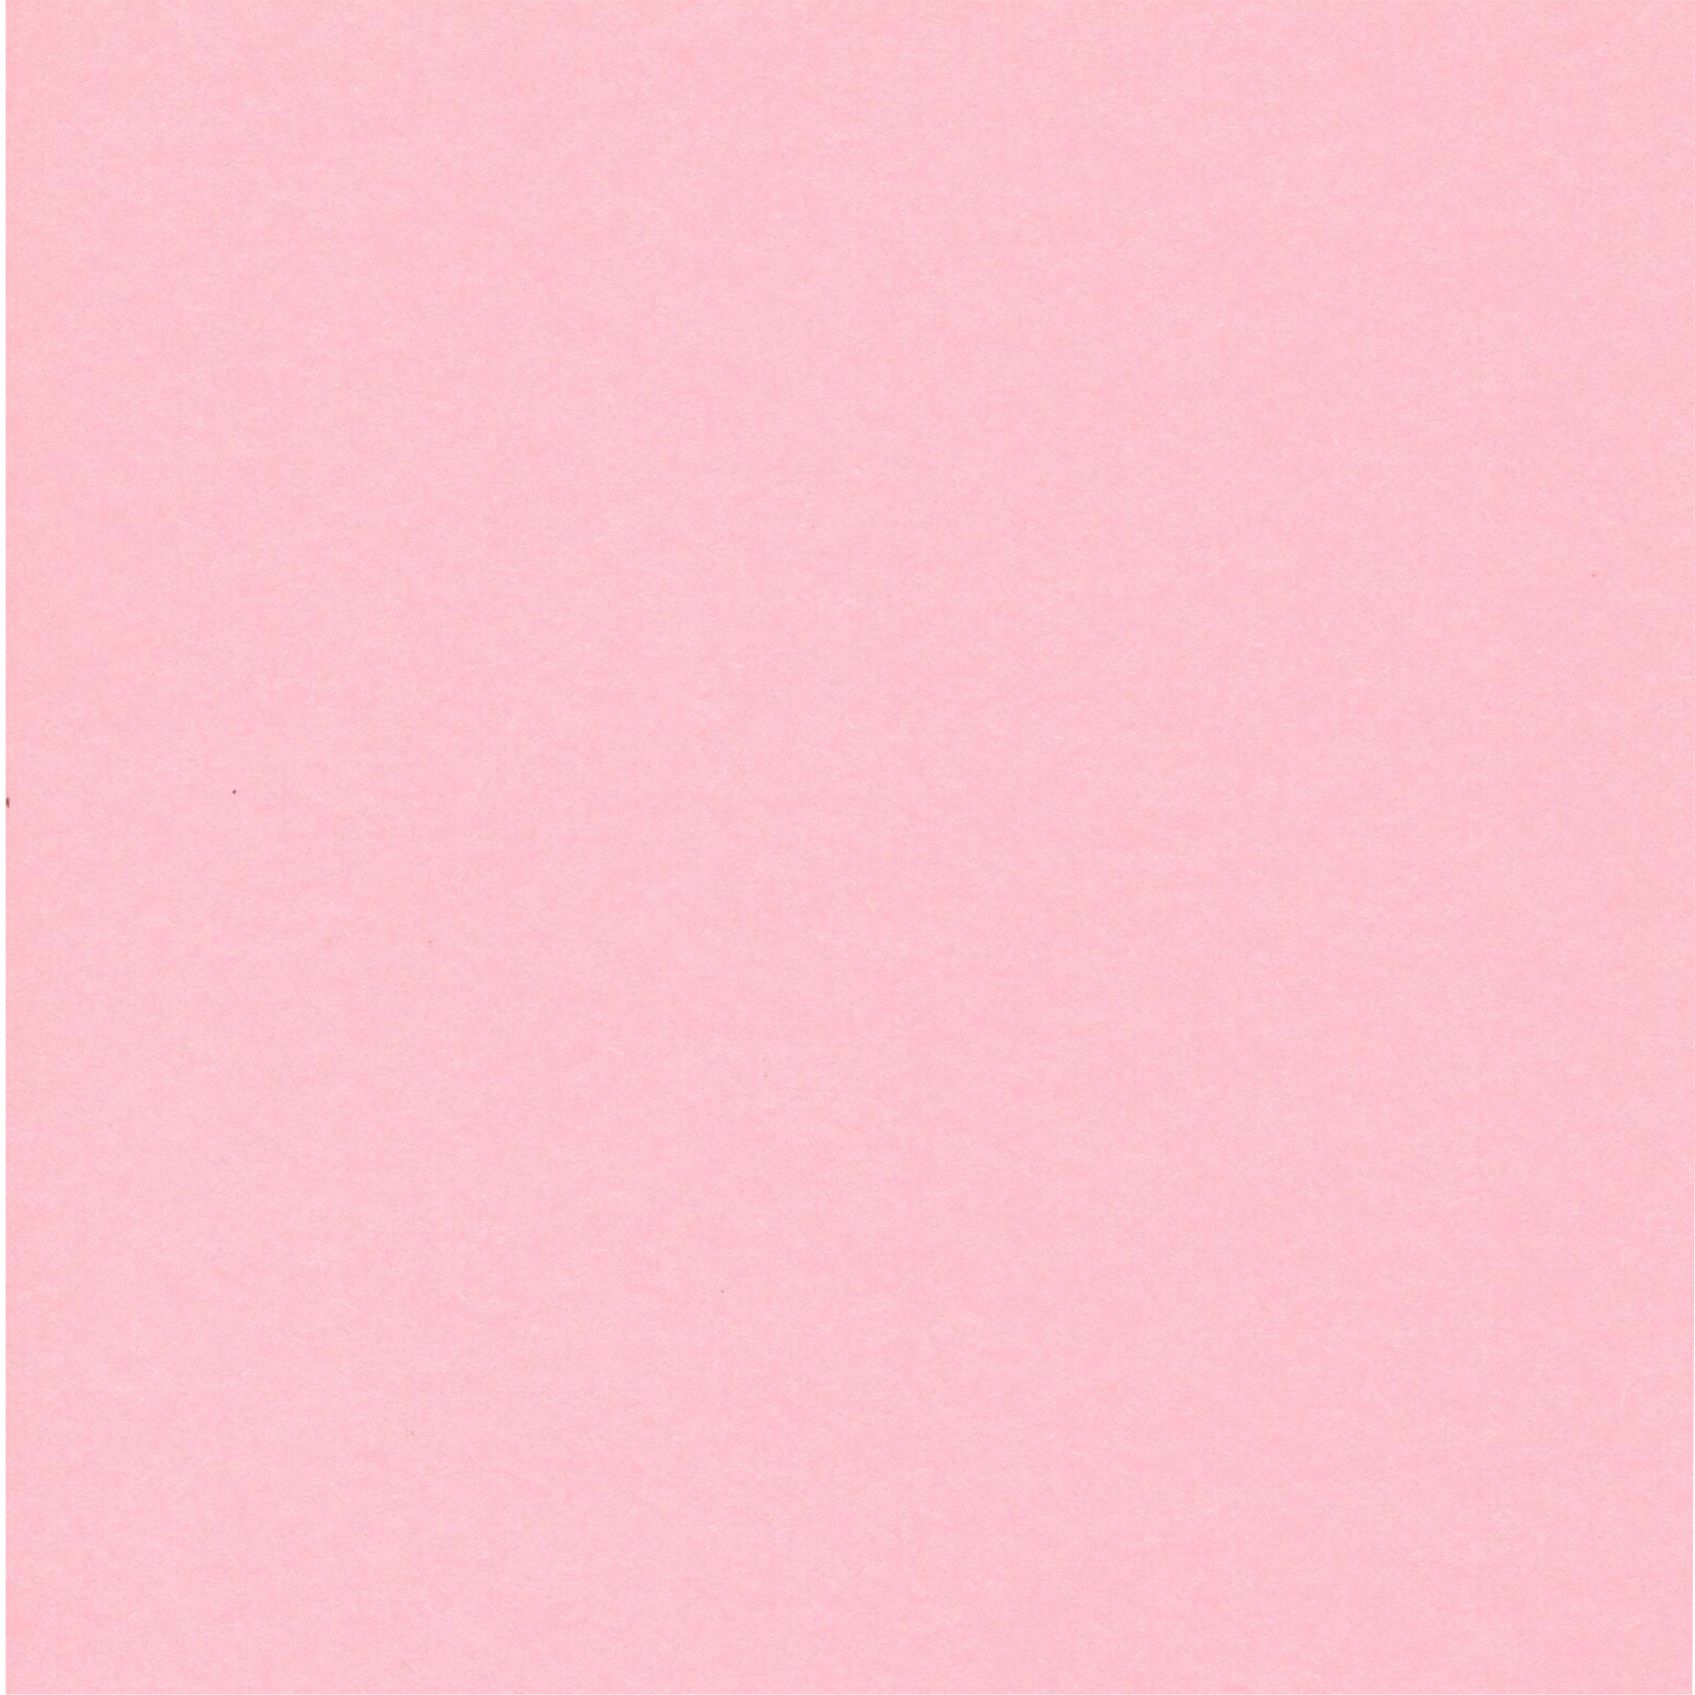 Pearlescent Light Pink Cardstock - 8.5 x 11 inch - 105Lb Cover - 10 Sheets  - Clear Path Paper 